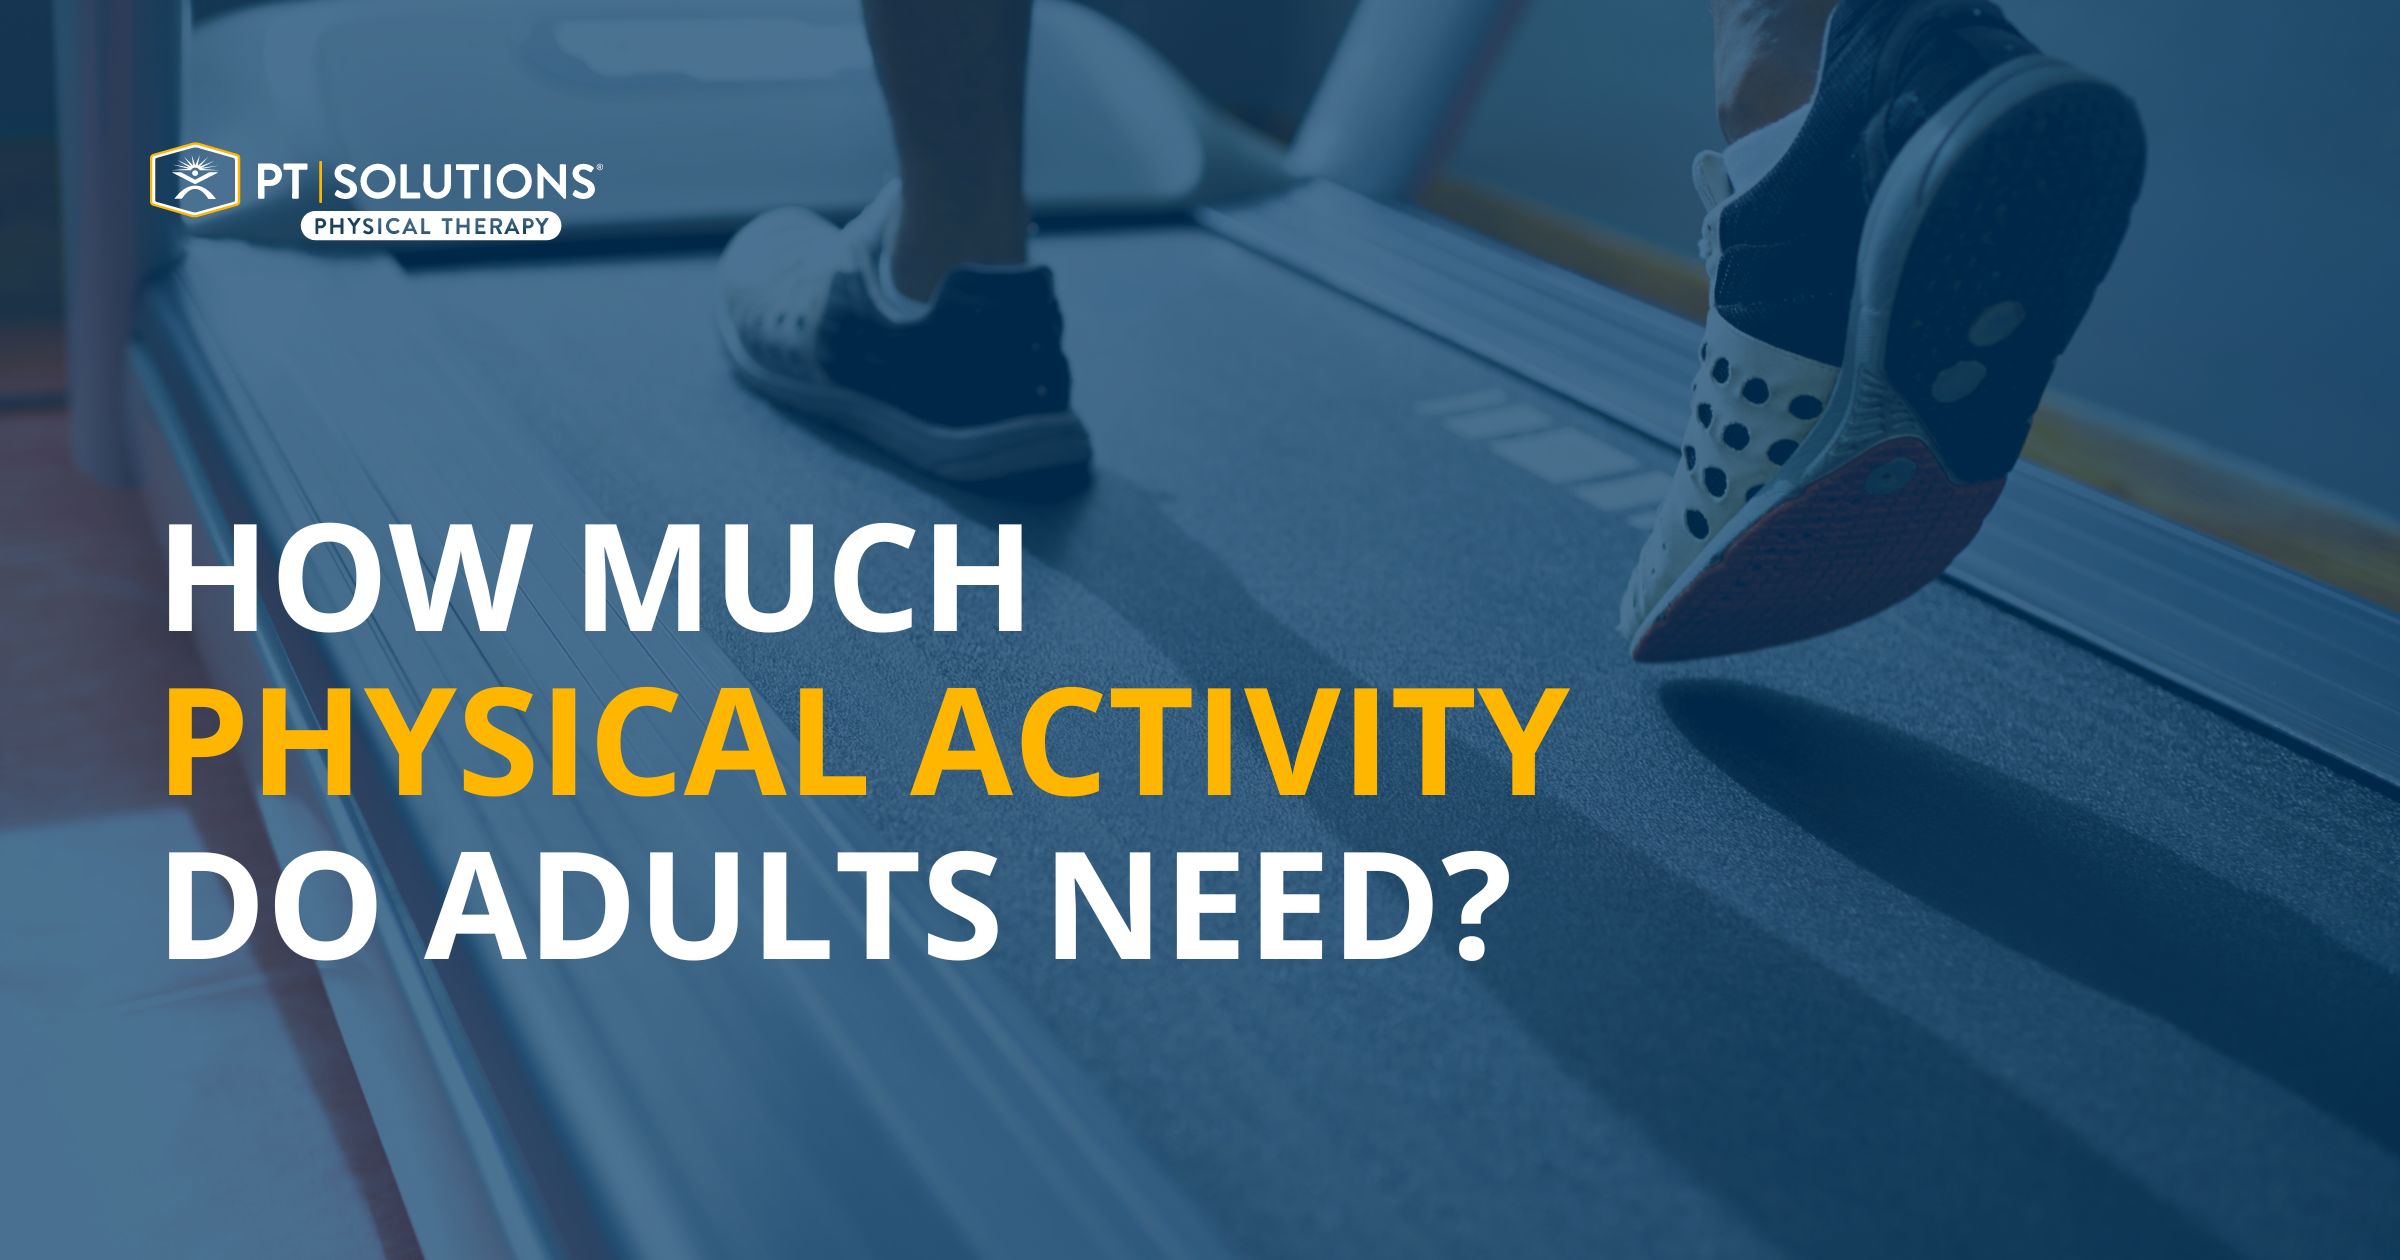 How much Physical Activity is Recommended for Adults per Week?